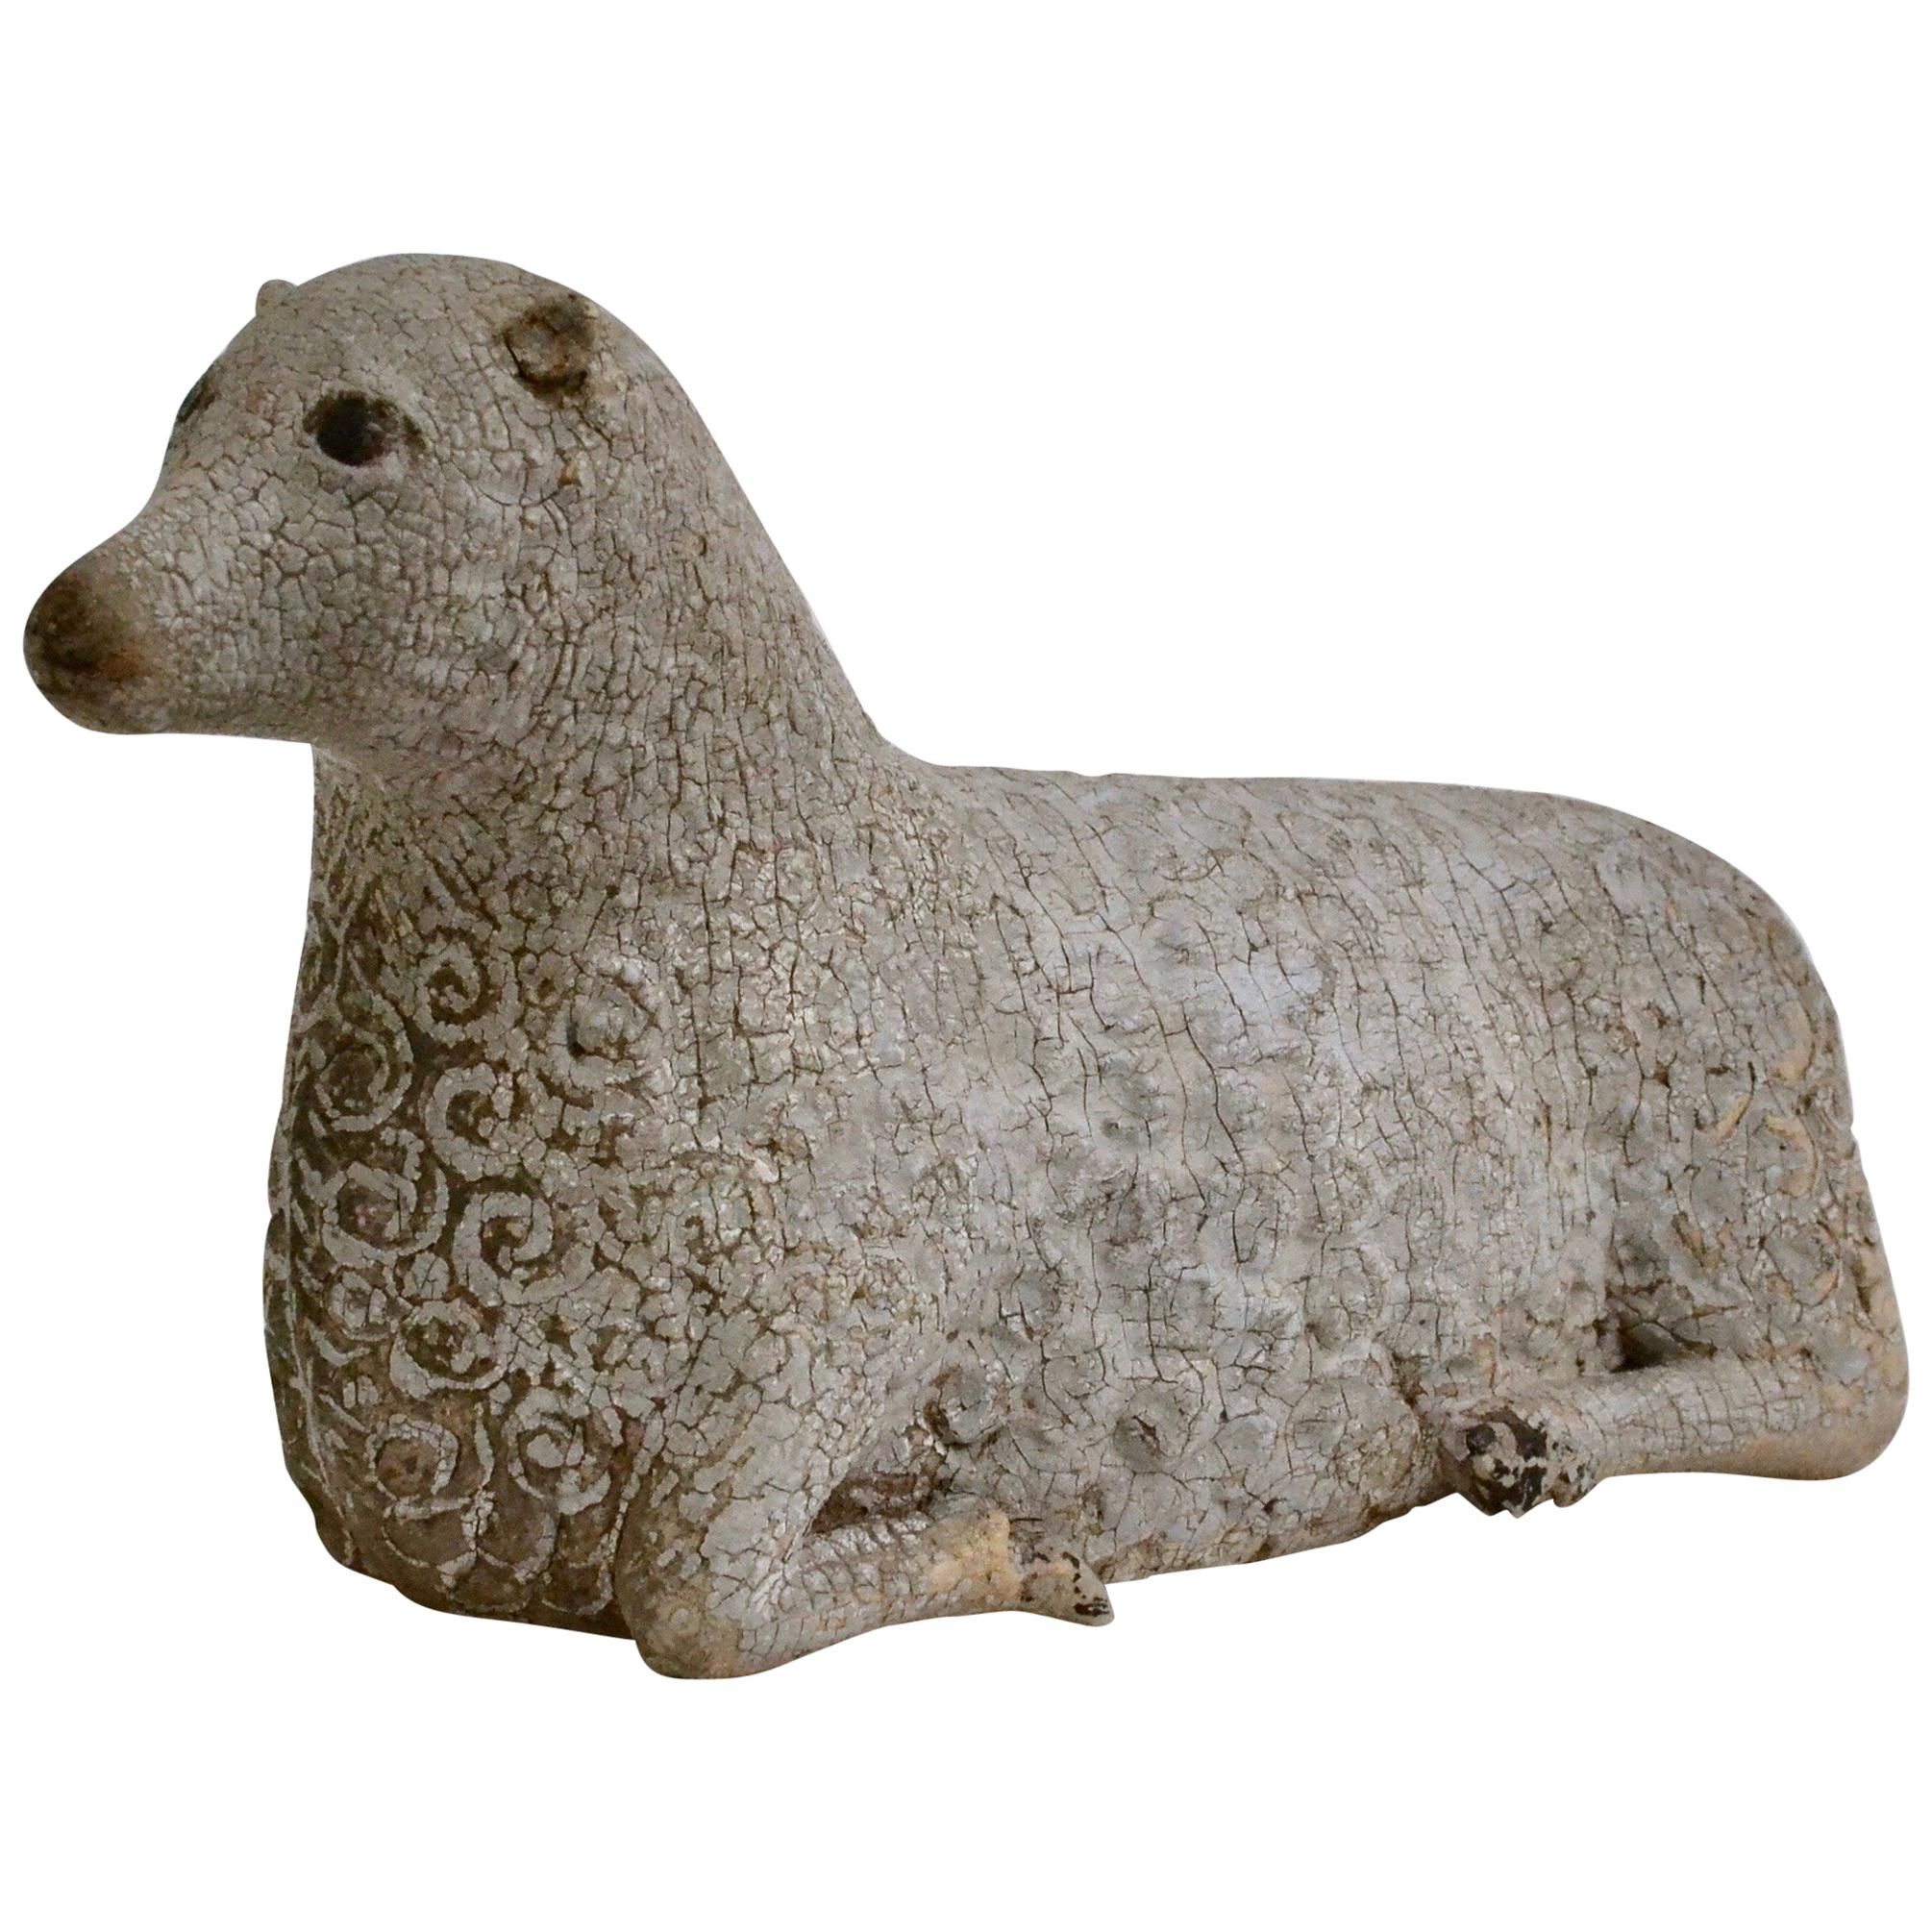 Swedish Folk Art Sculpture of a Wood Carved and Painted Sheep